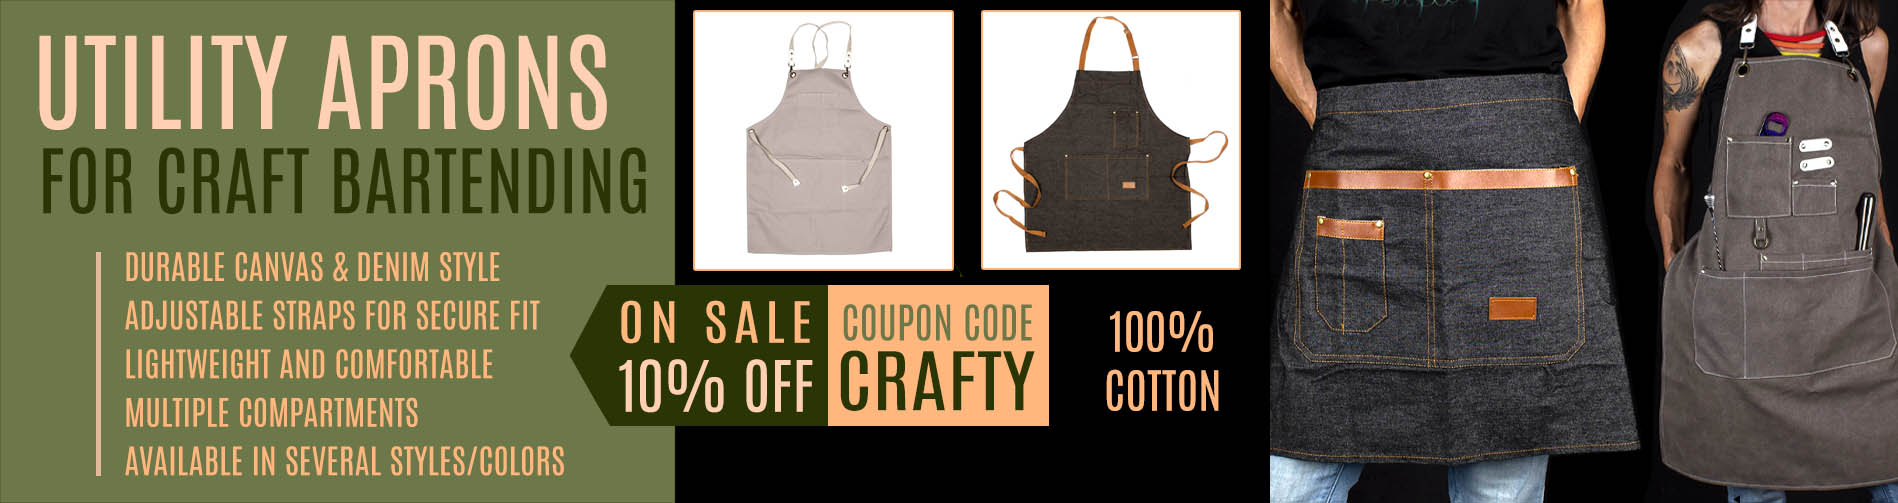 Utility Aprons for Craft Bartending